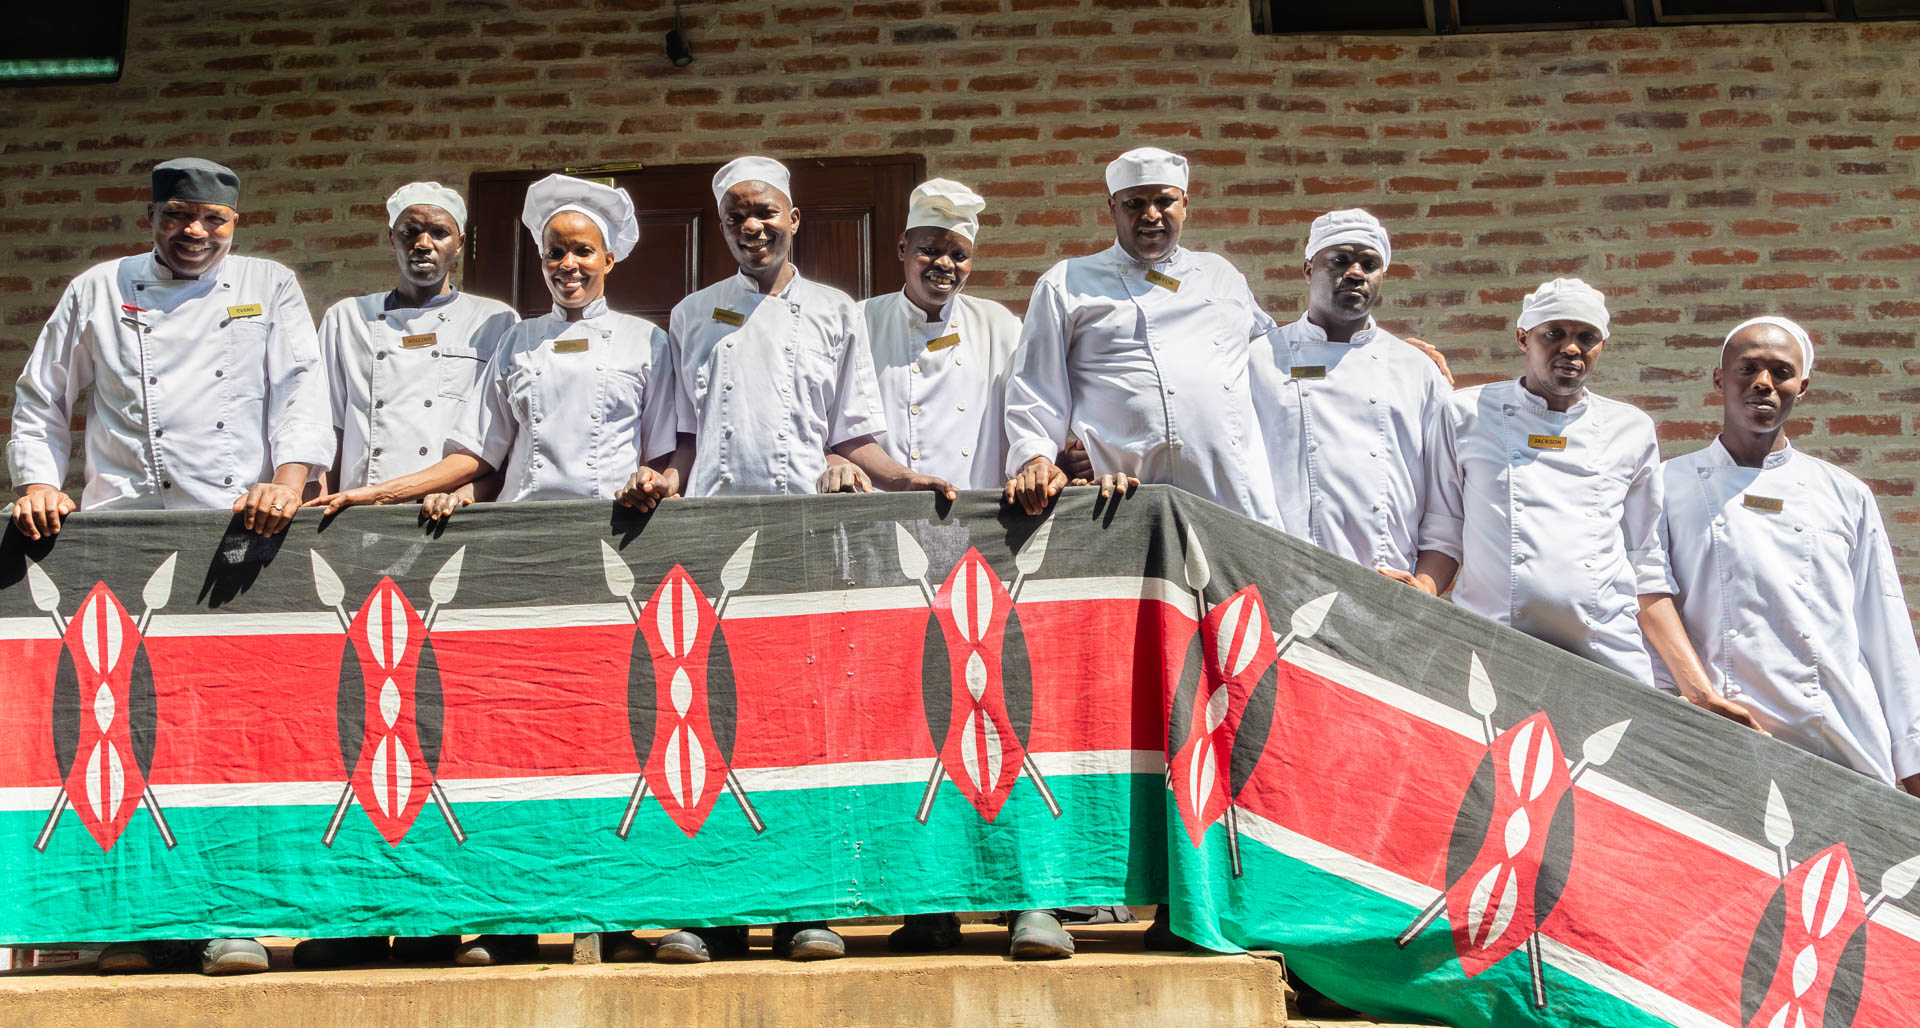 Above: The proud Kitchen team from all parts of Kenya